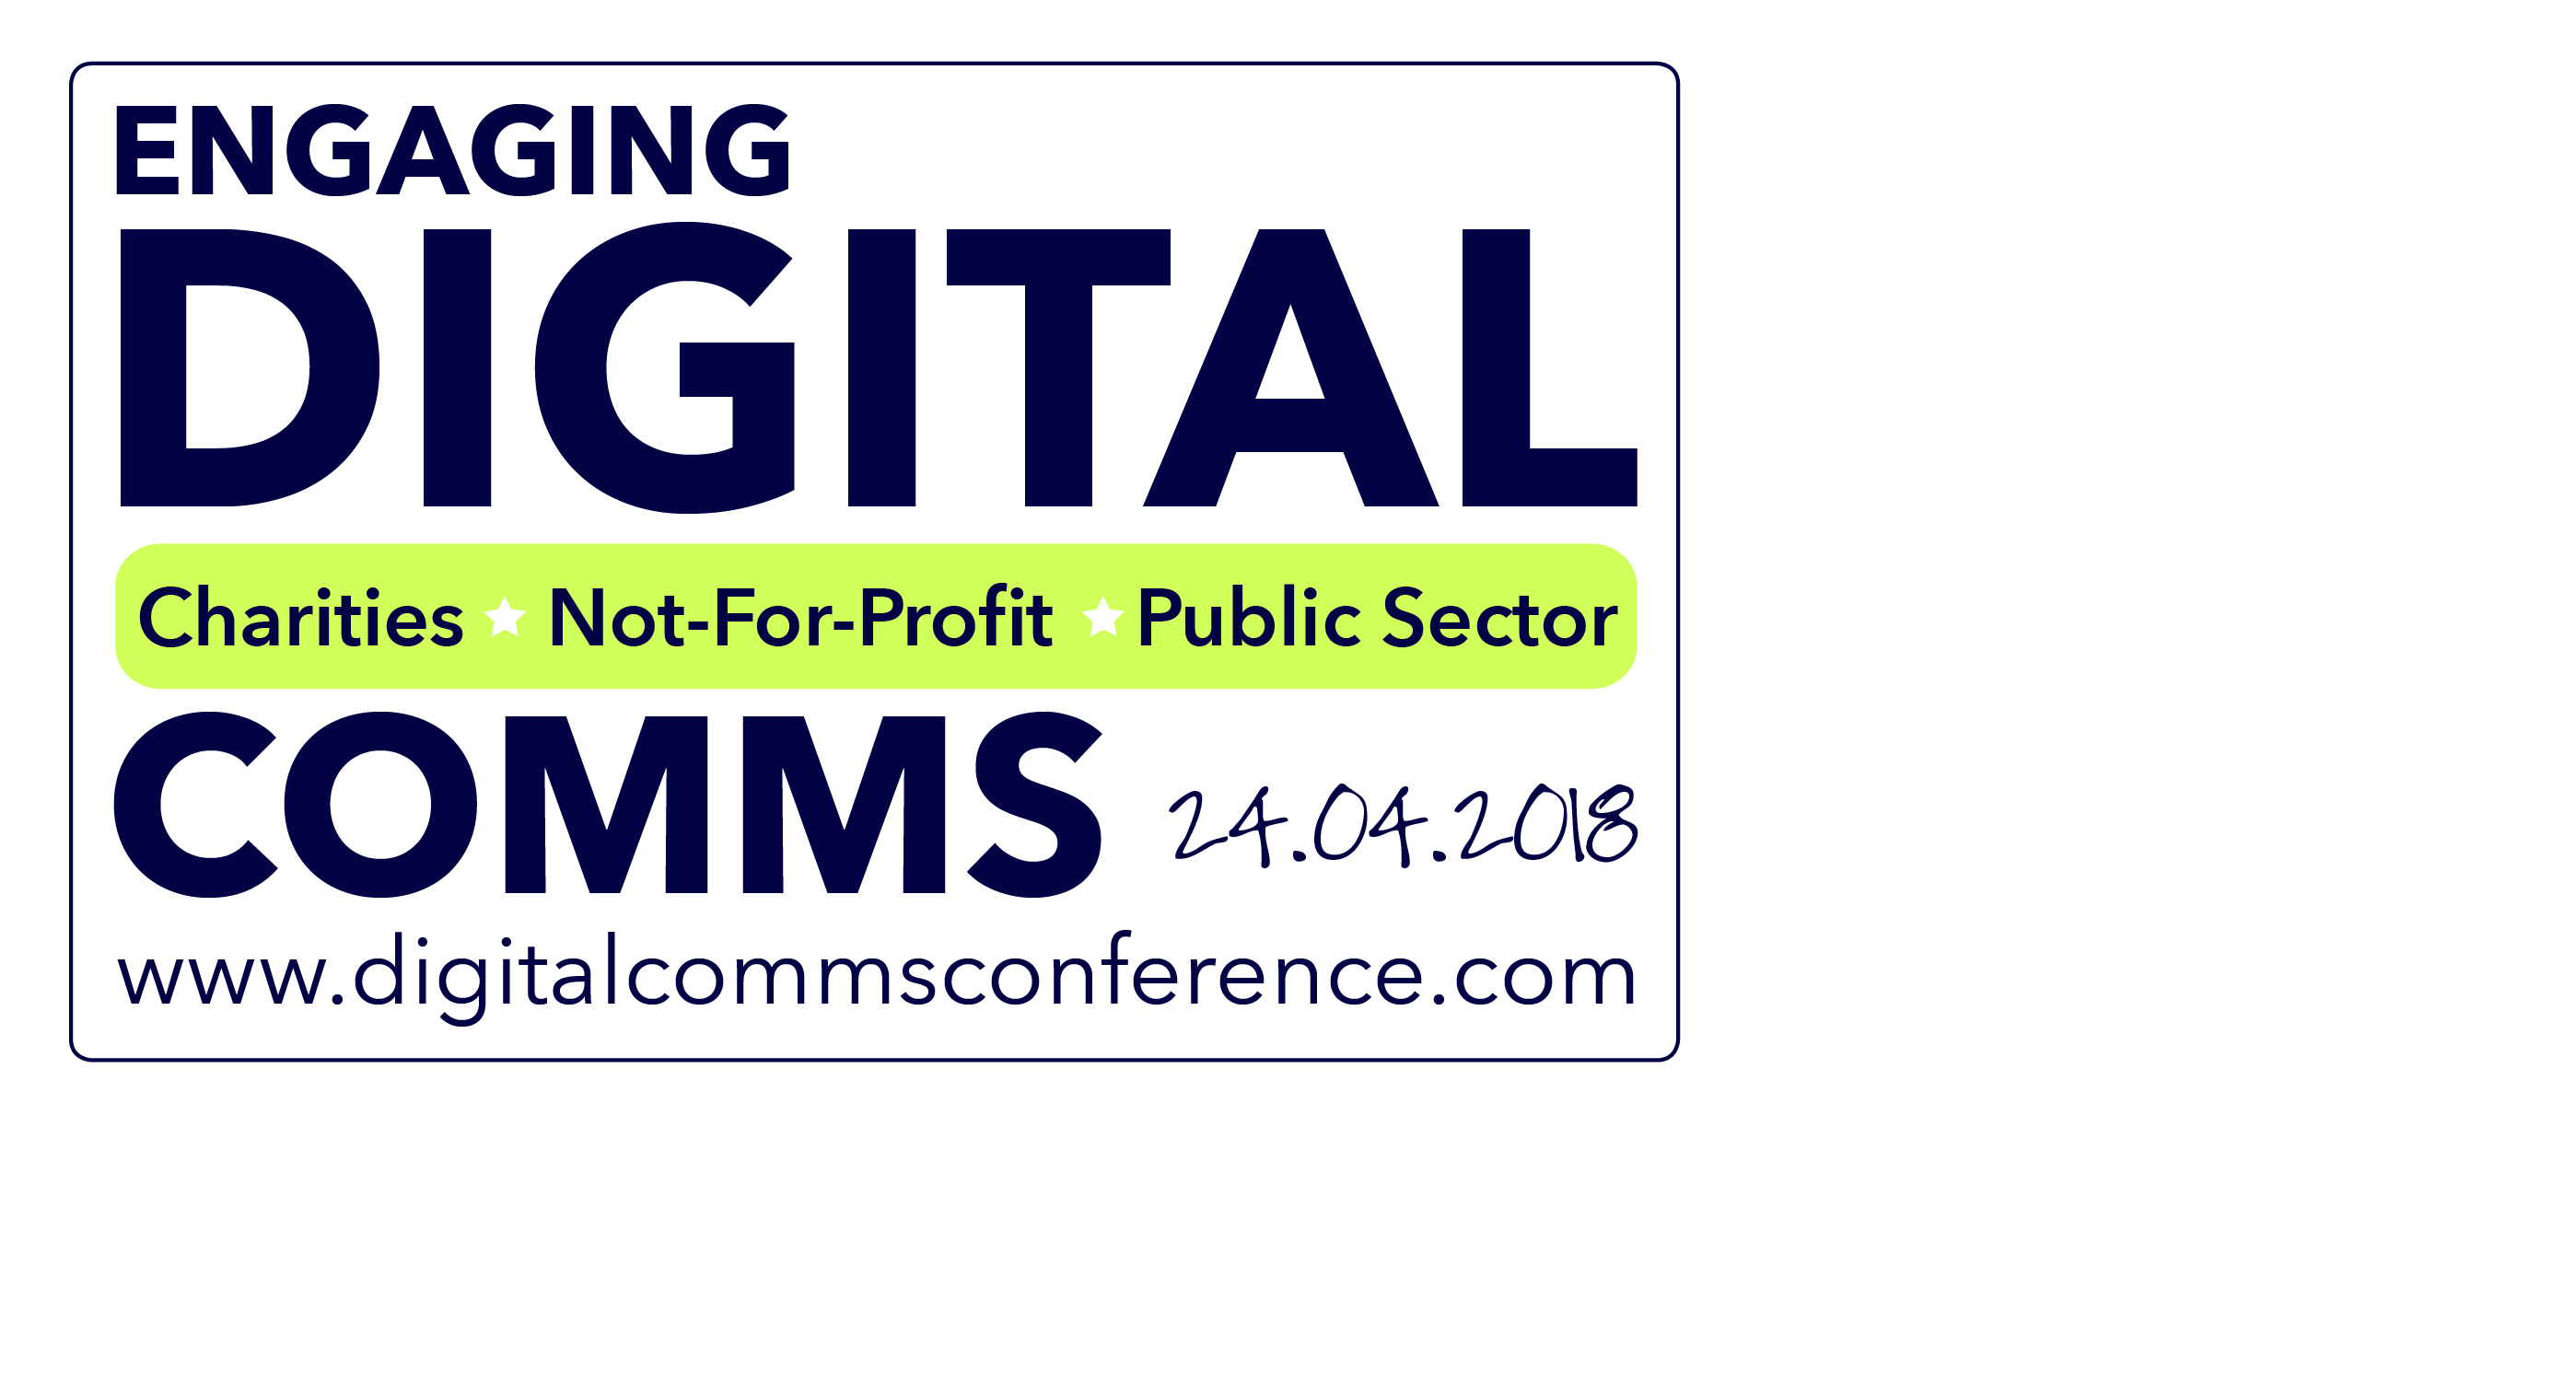 The Engaging Digital Comms Conference - Charities, Not-For-Profit, Public Sector